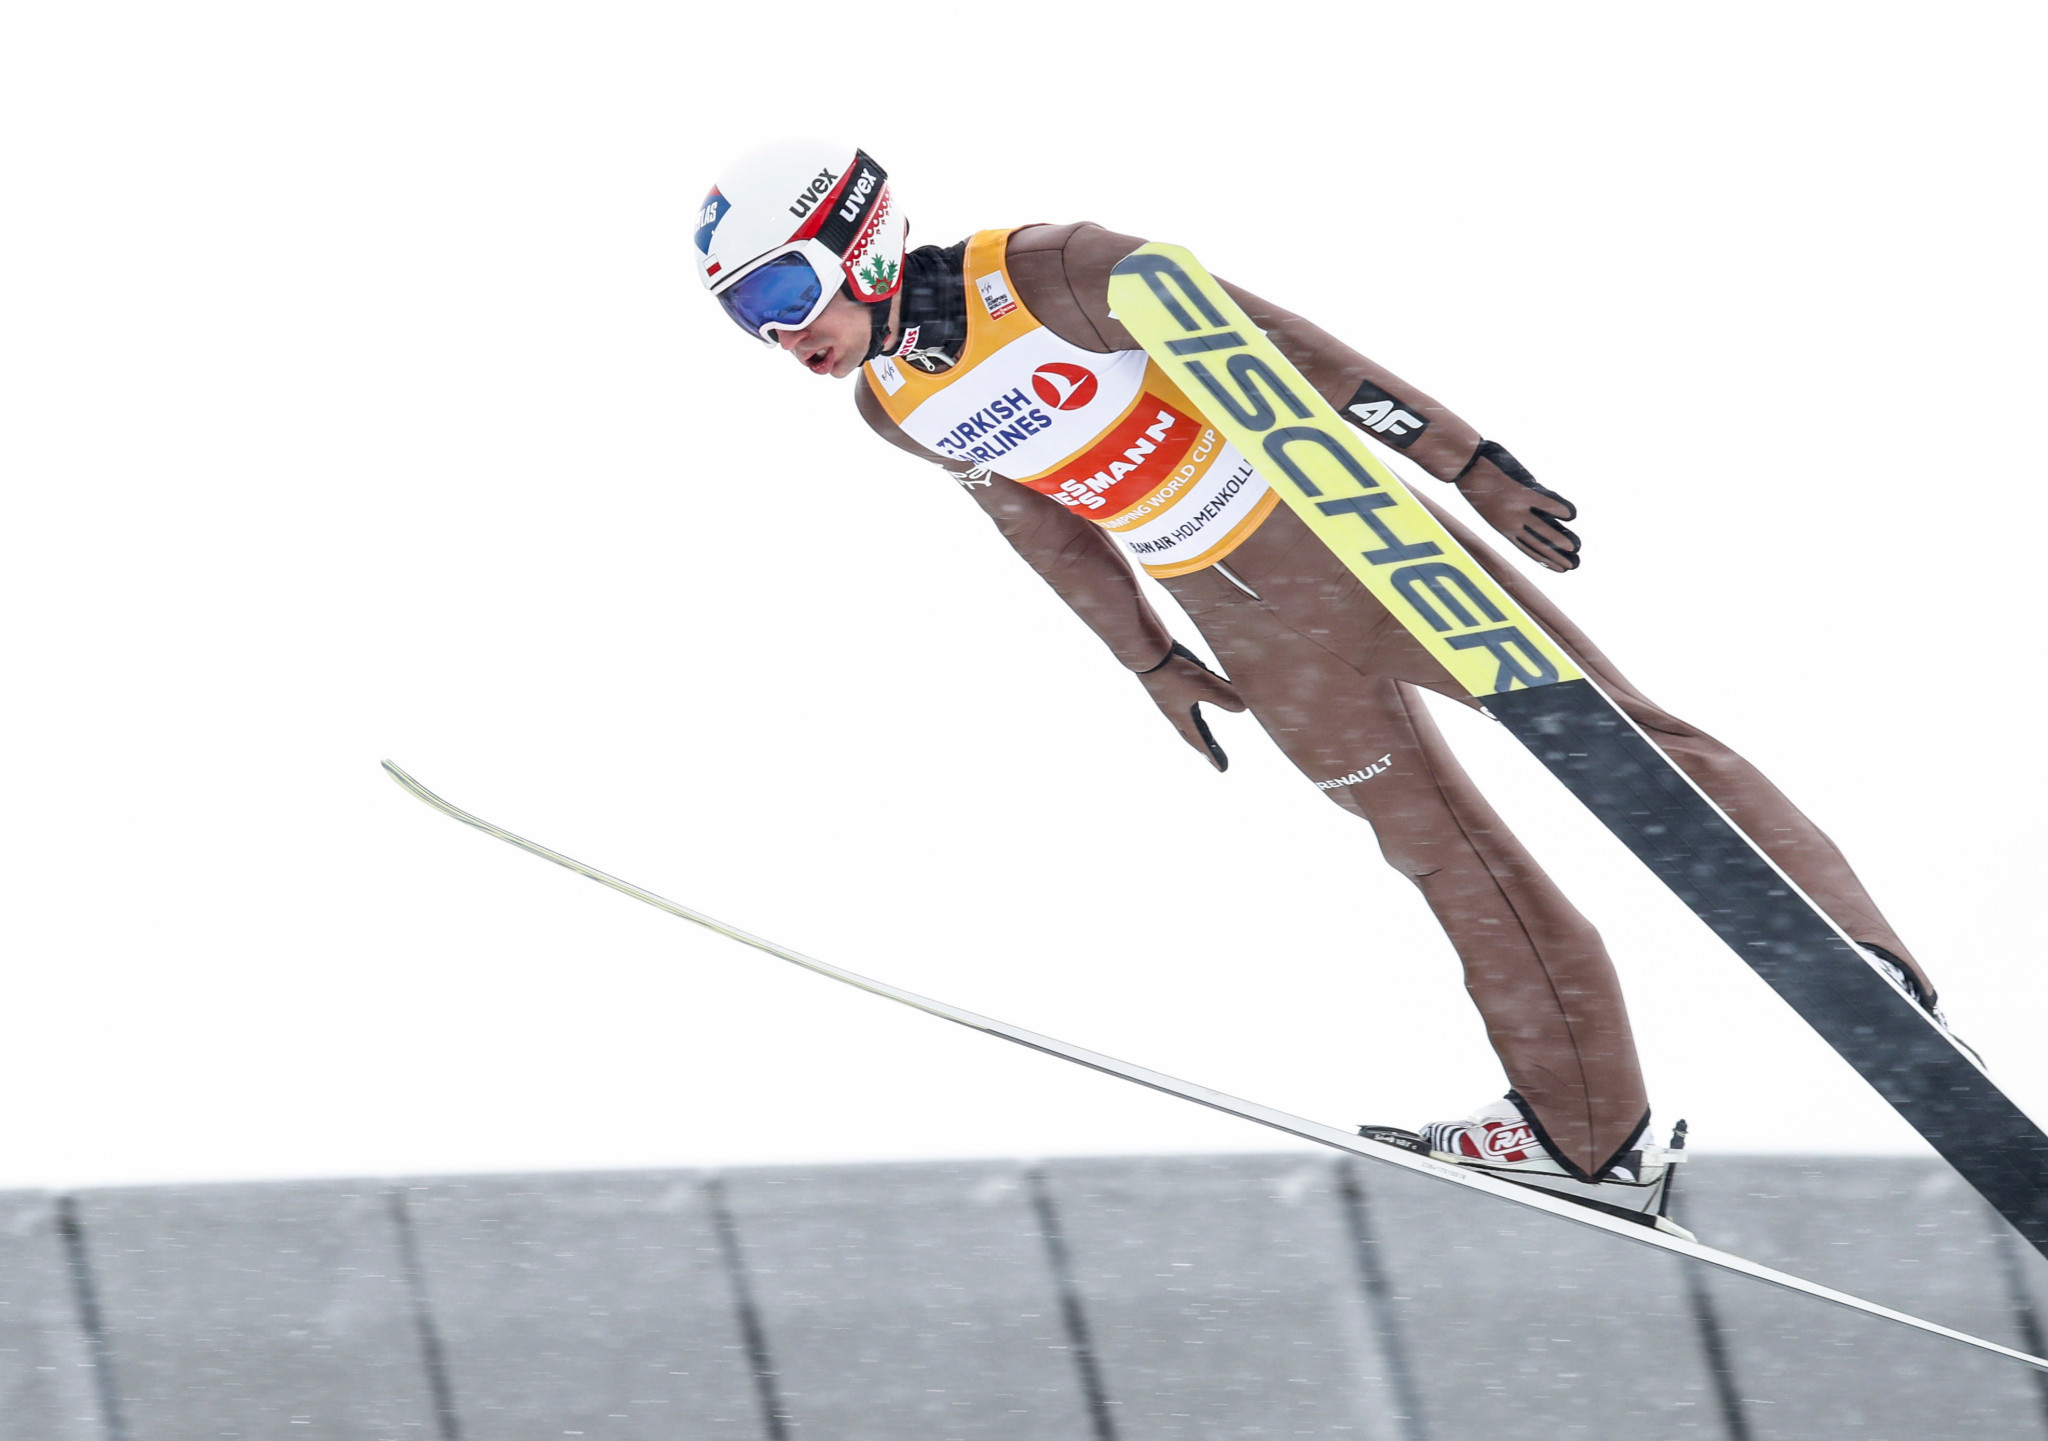 Stoch heads qualification at FIS Ski Jumping World Cup in Lillehammer